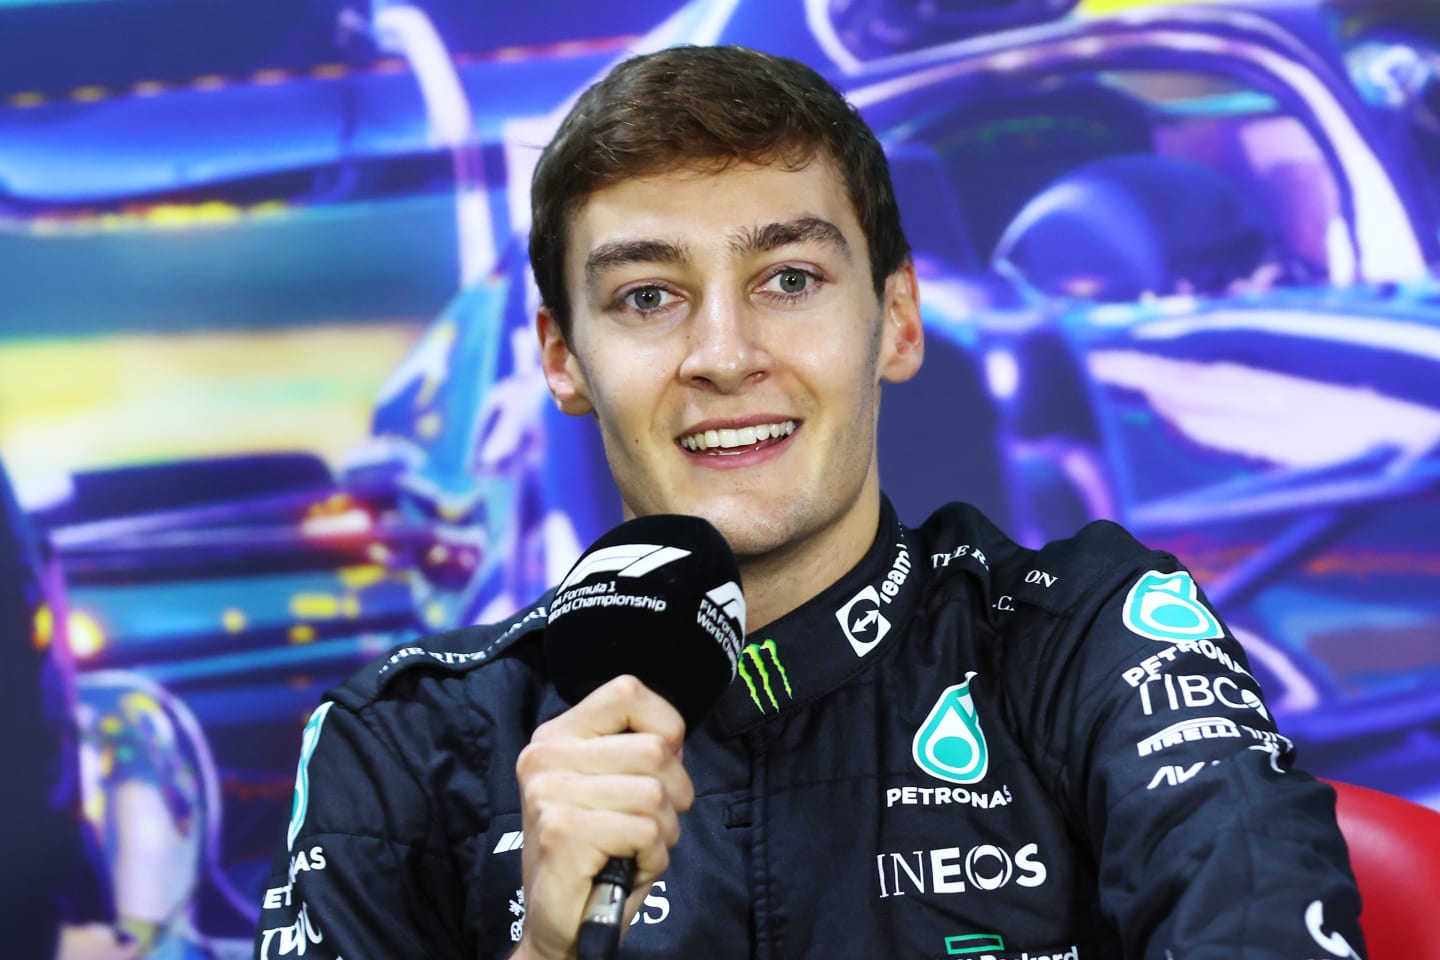 SAO PAULO, BRAZIL - NOVEMBER 13: Race winner George Russell of Great Britain and Mercedes talks in the press conference after the F1 Grand Prix of Brazil at Autodromo Jose Carlos Pace on November 13, 2022 in Sao Paulo, Brazil. (Photo by Dan Istitene/Getty Images)